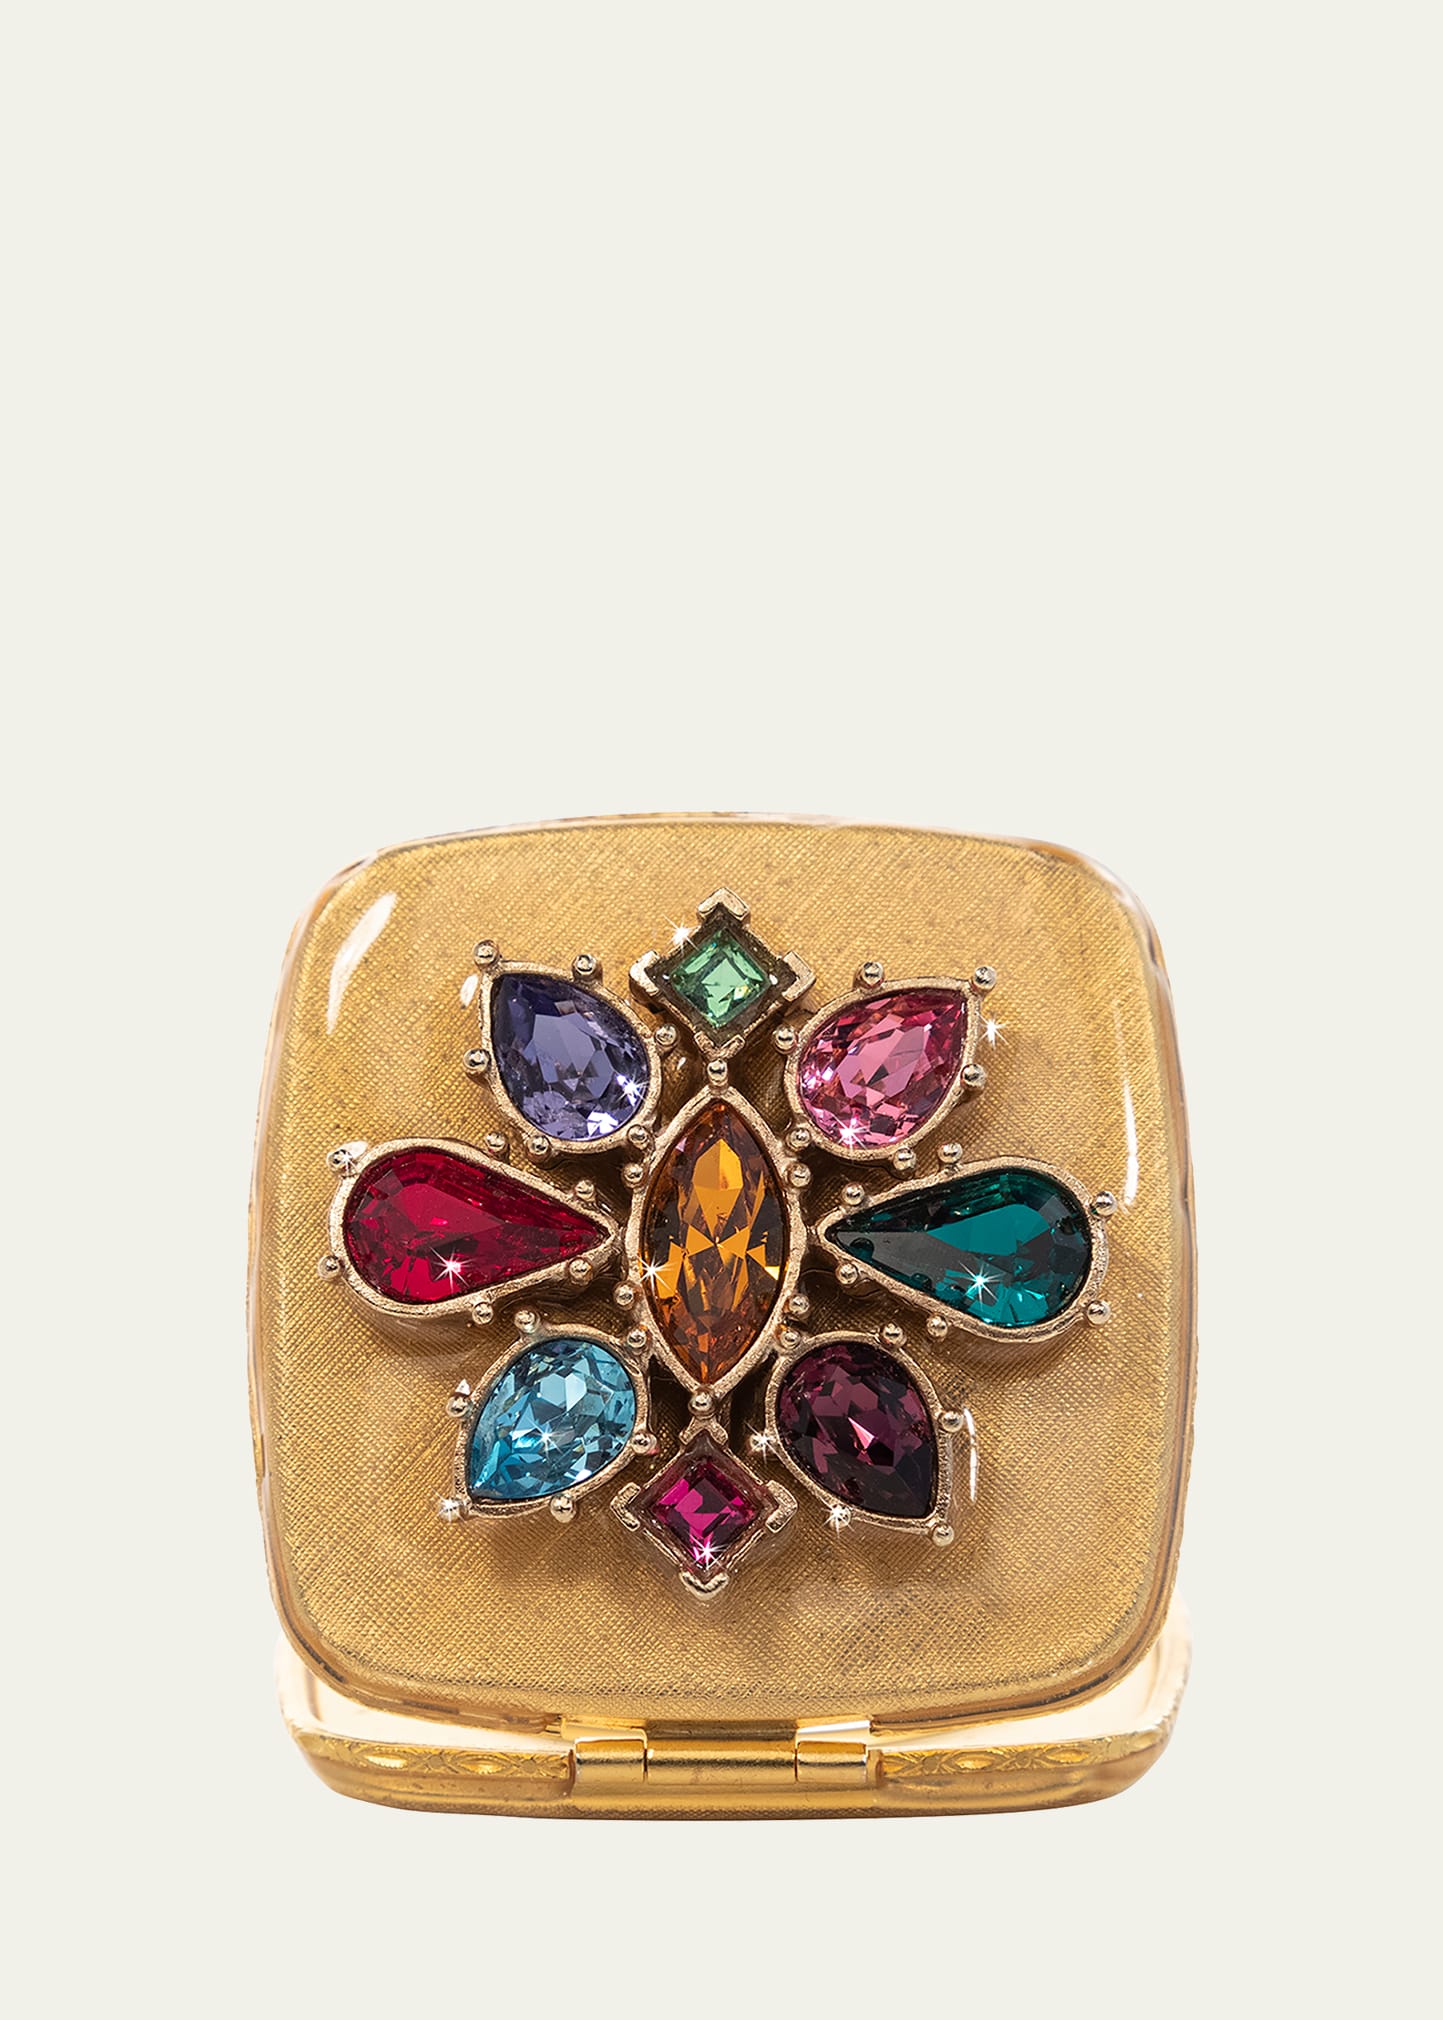 Over Jeweled Square Compact